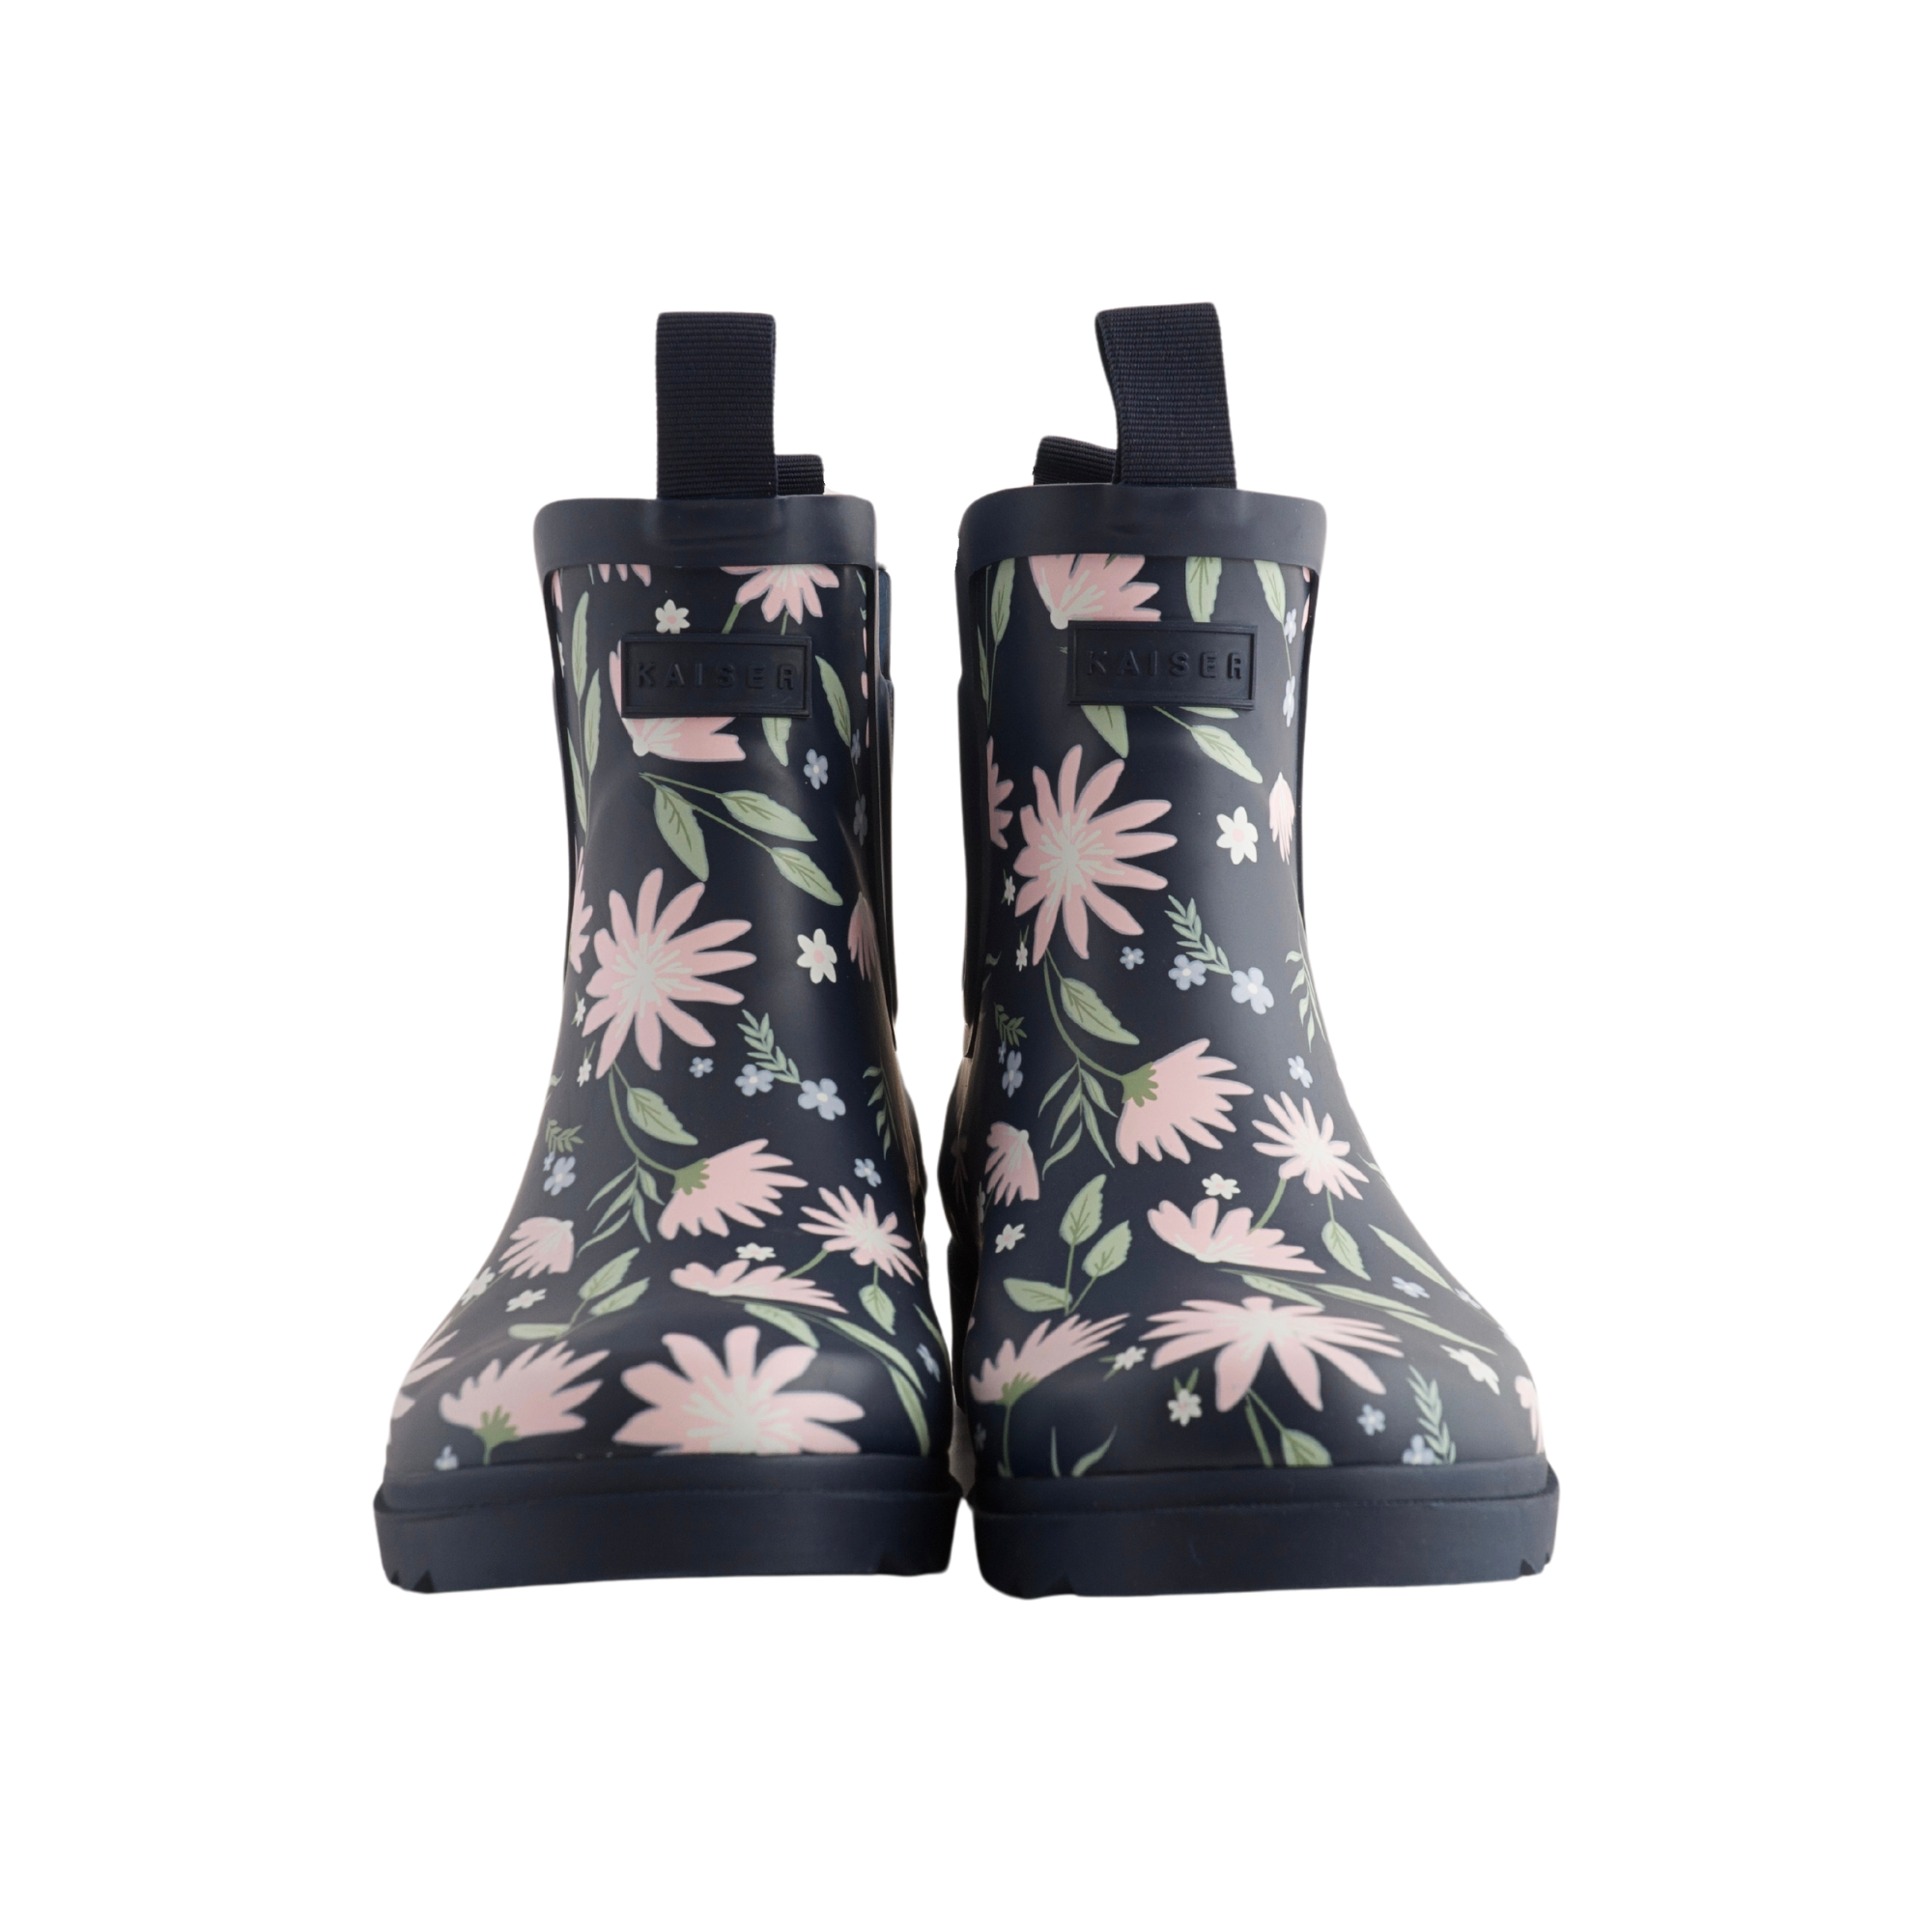 Ankle Gumboots - Navy Floral Size 7